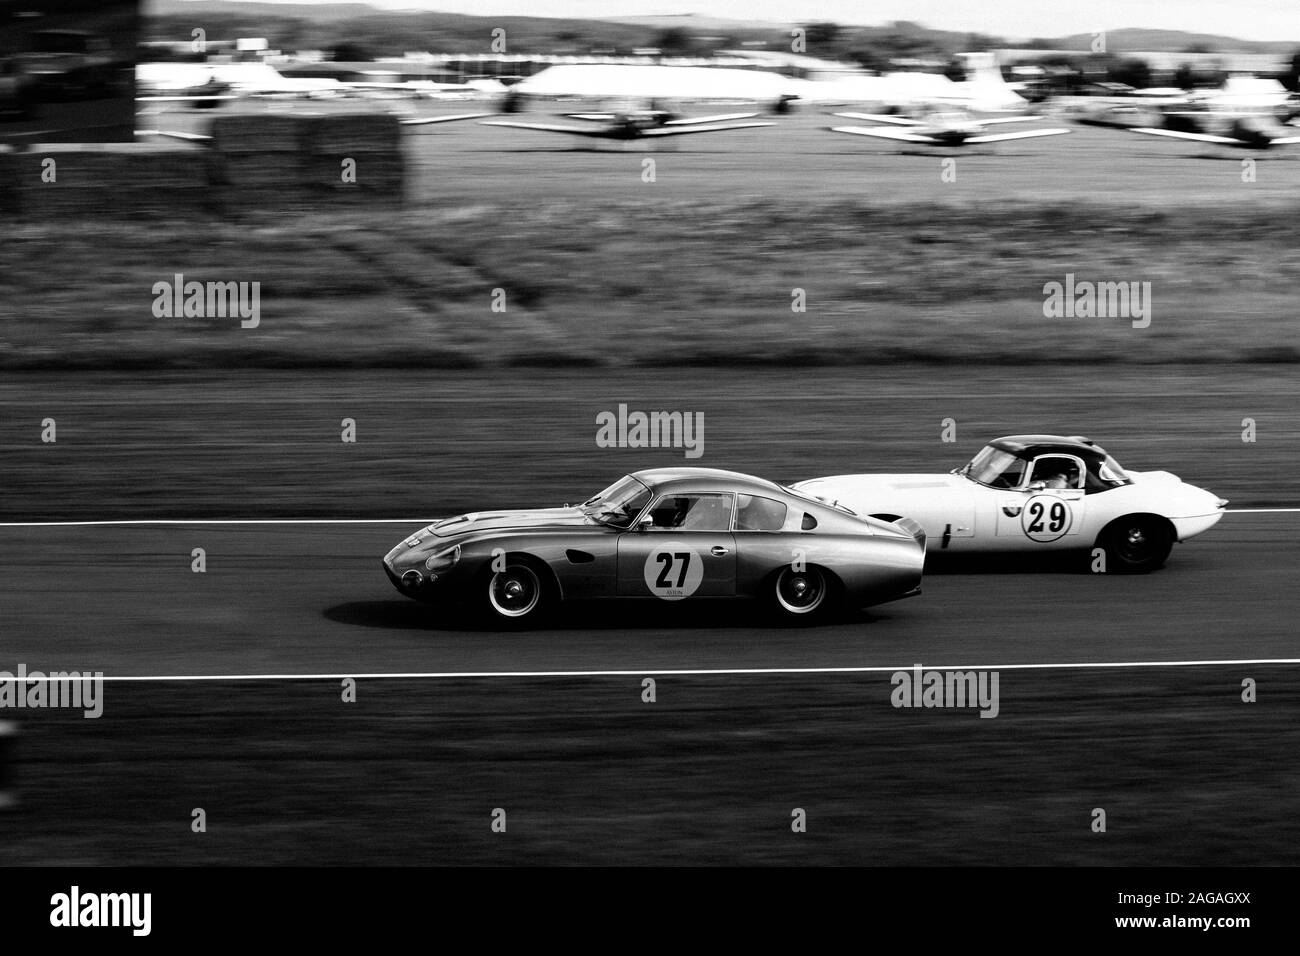 GOODWOOD, UNITED KINGDOM - Sep 09, 2017: A high angle grayscale shot of beautiful sports cars riding in Goodwood city of the UK Stock Photo